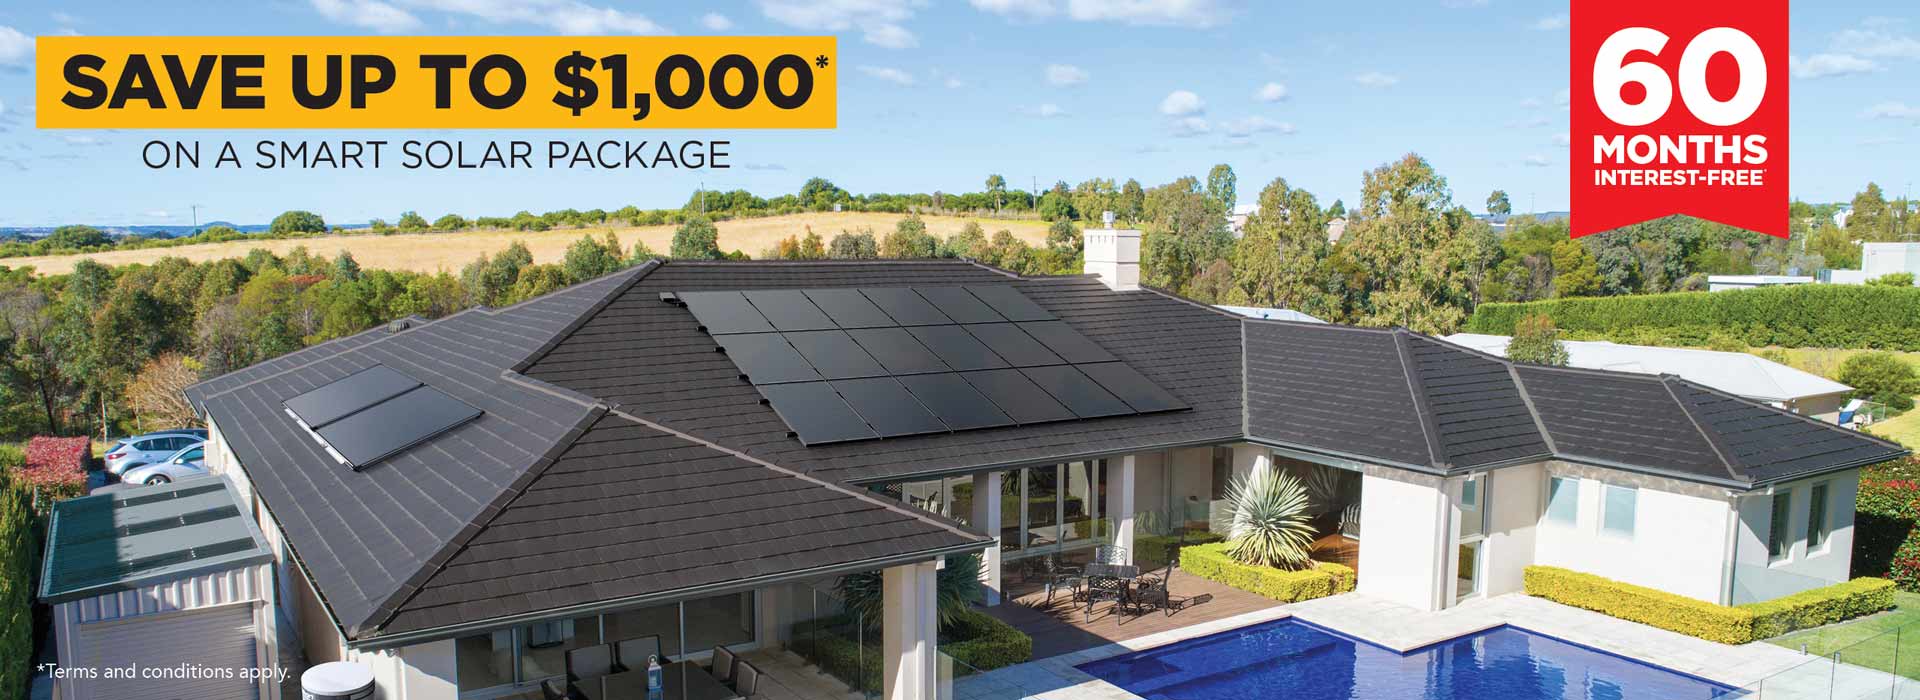 Save up to $1,000 on a solar power system and solar hot water combo